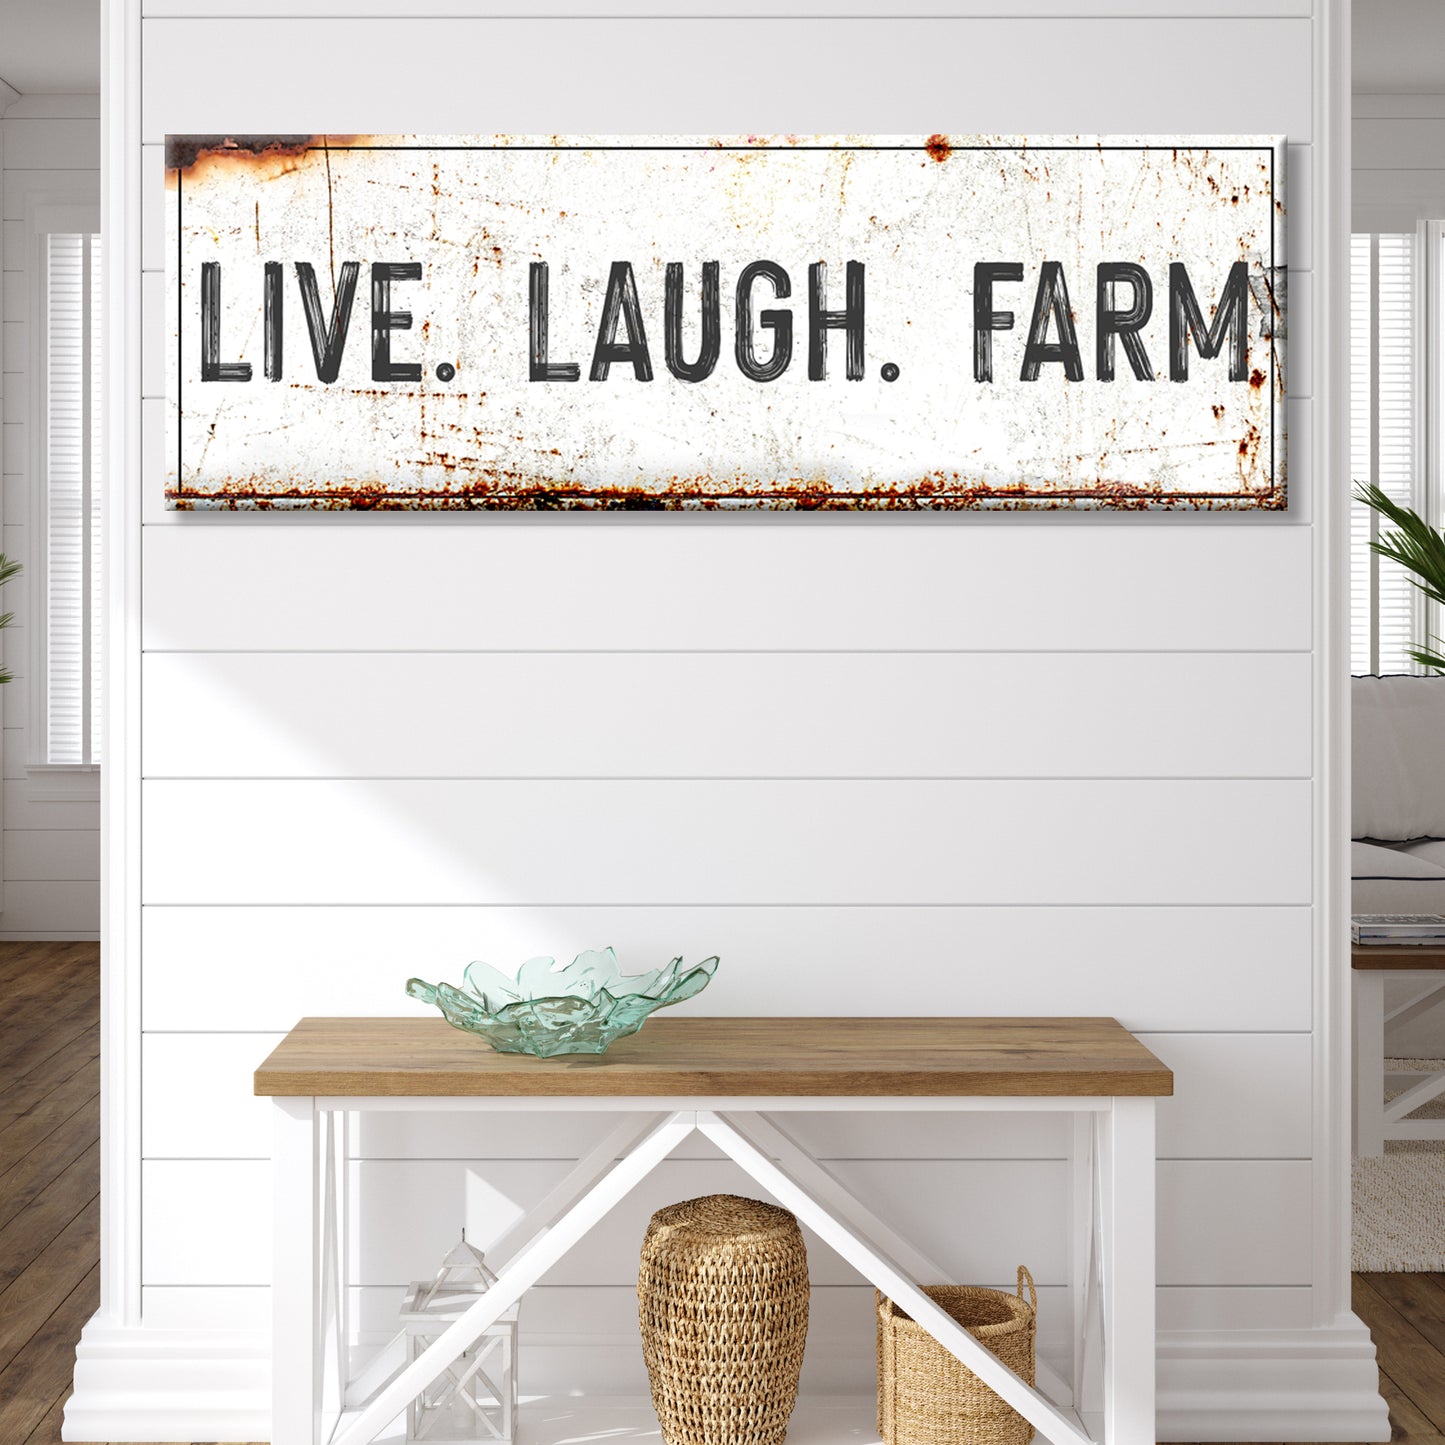 Live Laugh Farm Sign - Image by Tailored Canvases